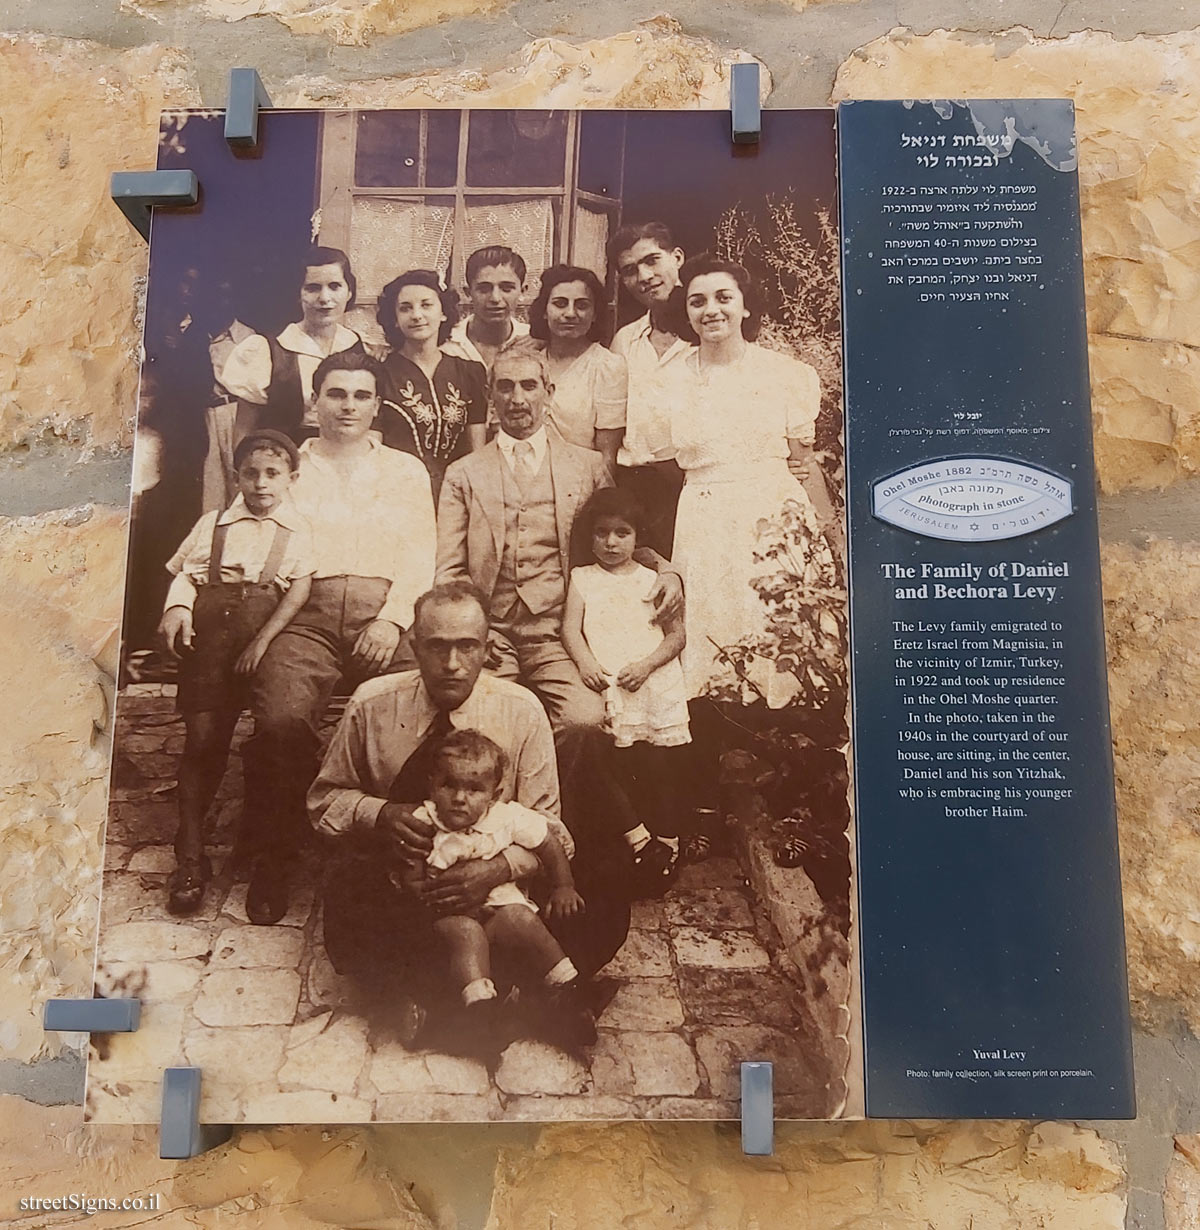 Jerusalem - Photograph in stone - The Family of Daniel and Bechora Levy